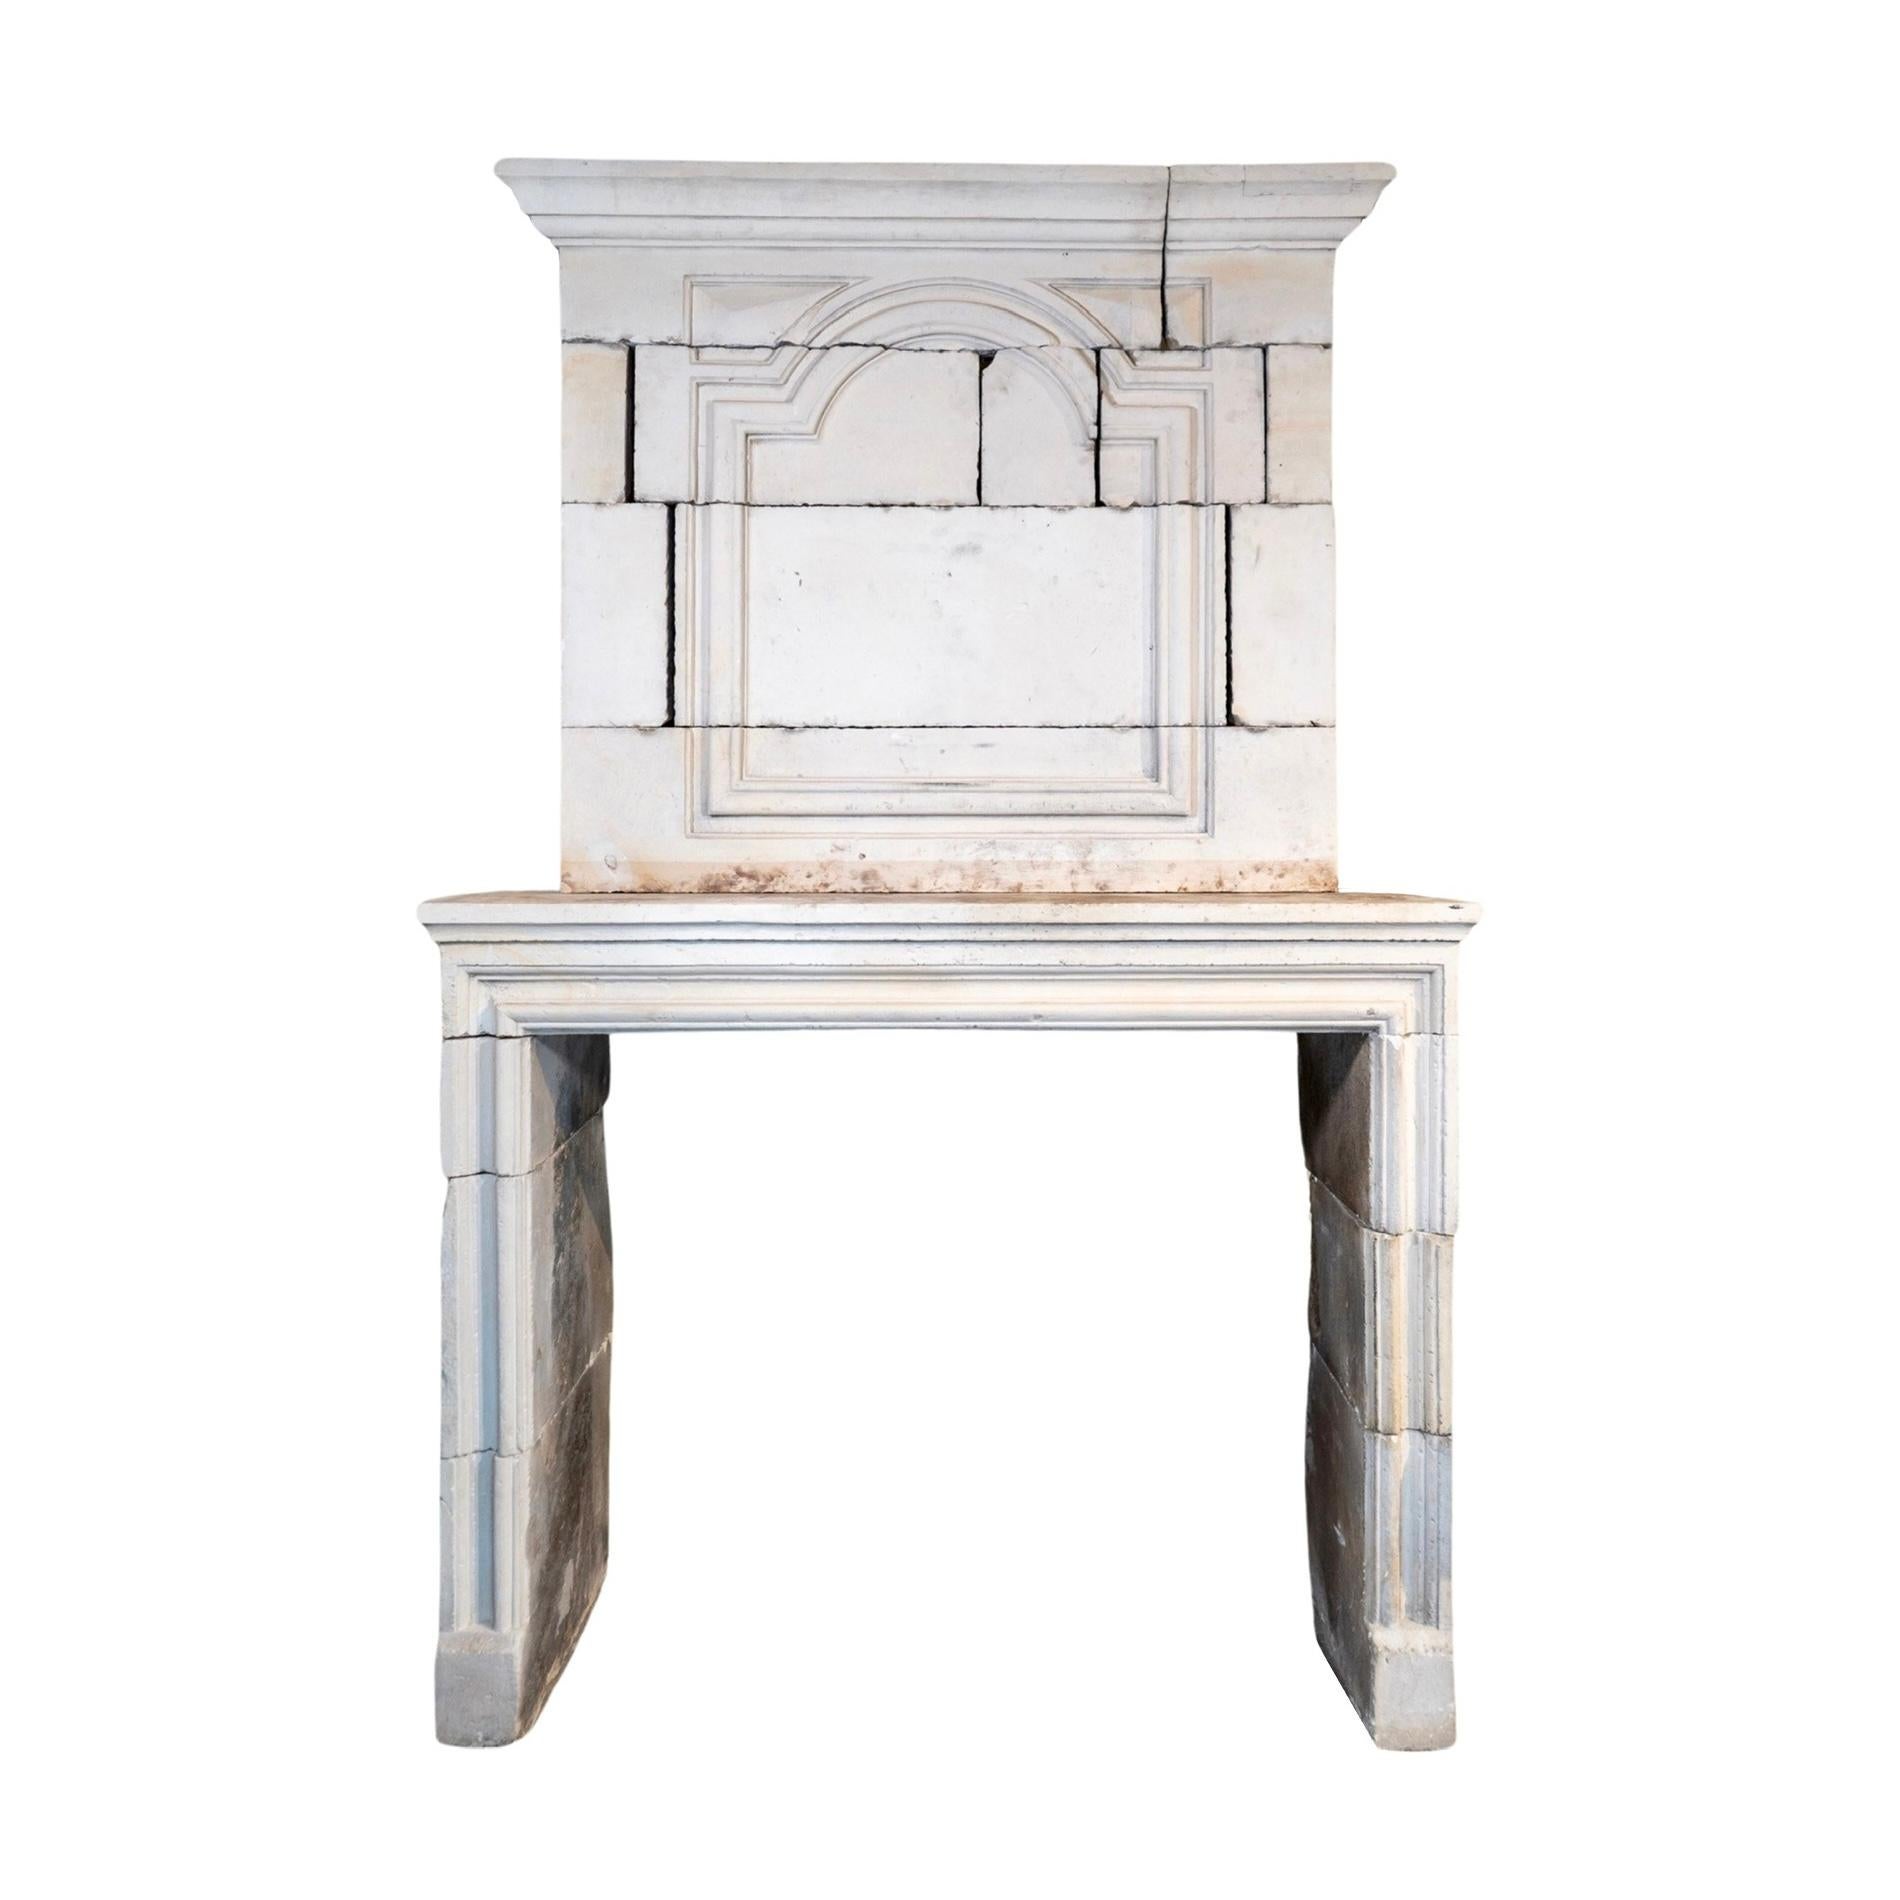 This antique French Limestone Fireplace is a stunning addition to any home. Handcrafted in France in 1810, it features a carved trumeau and intricate style carvings, making it a true work of art. With semi-quatrefoil designs and a Louis XIV style